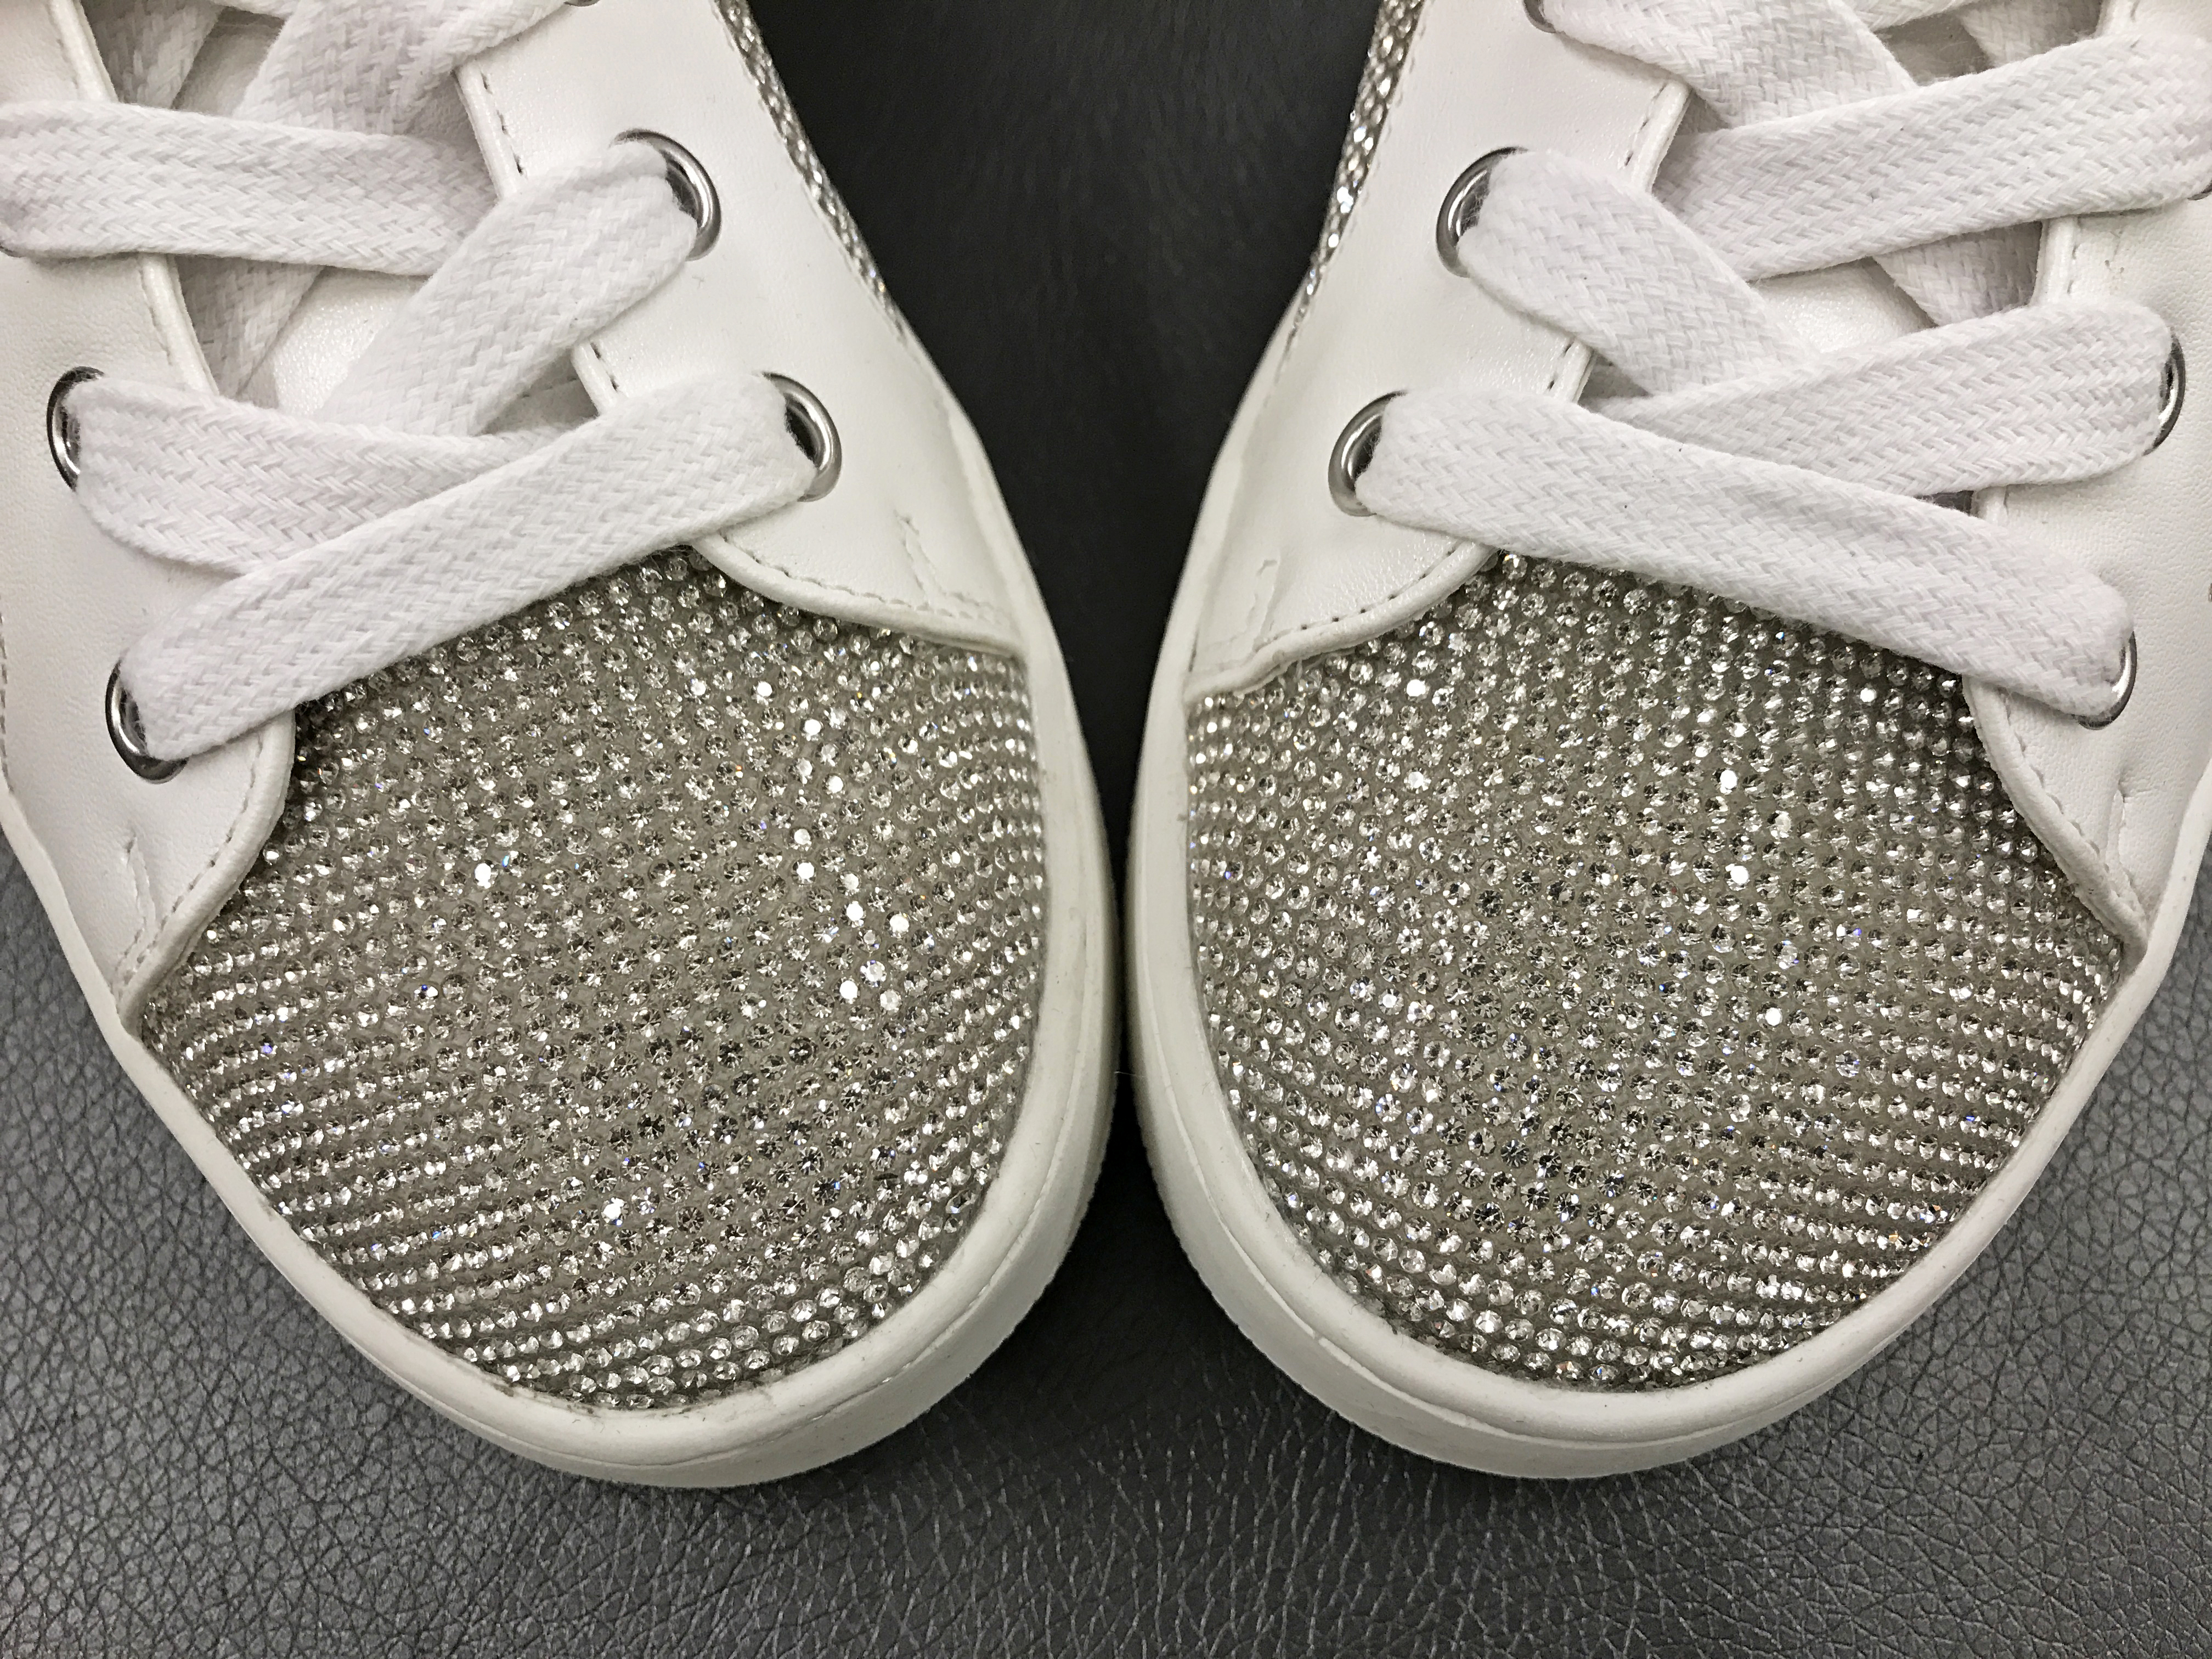 How to Attach Rhinestones to Textiles